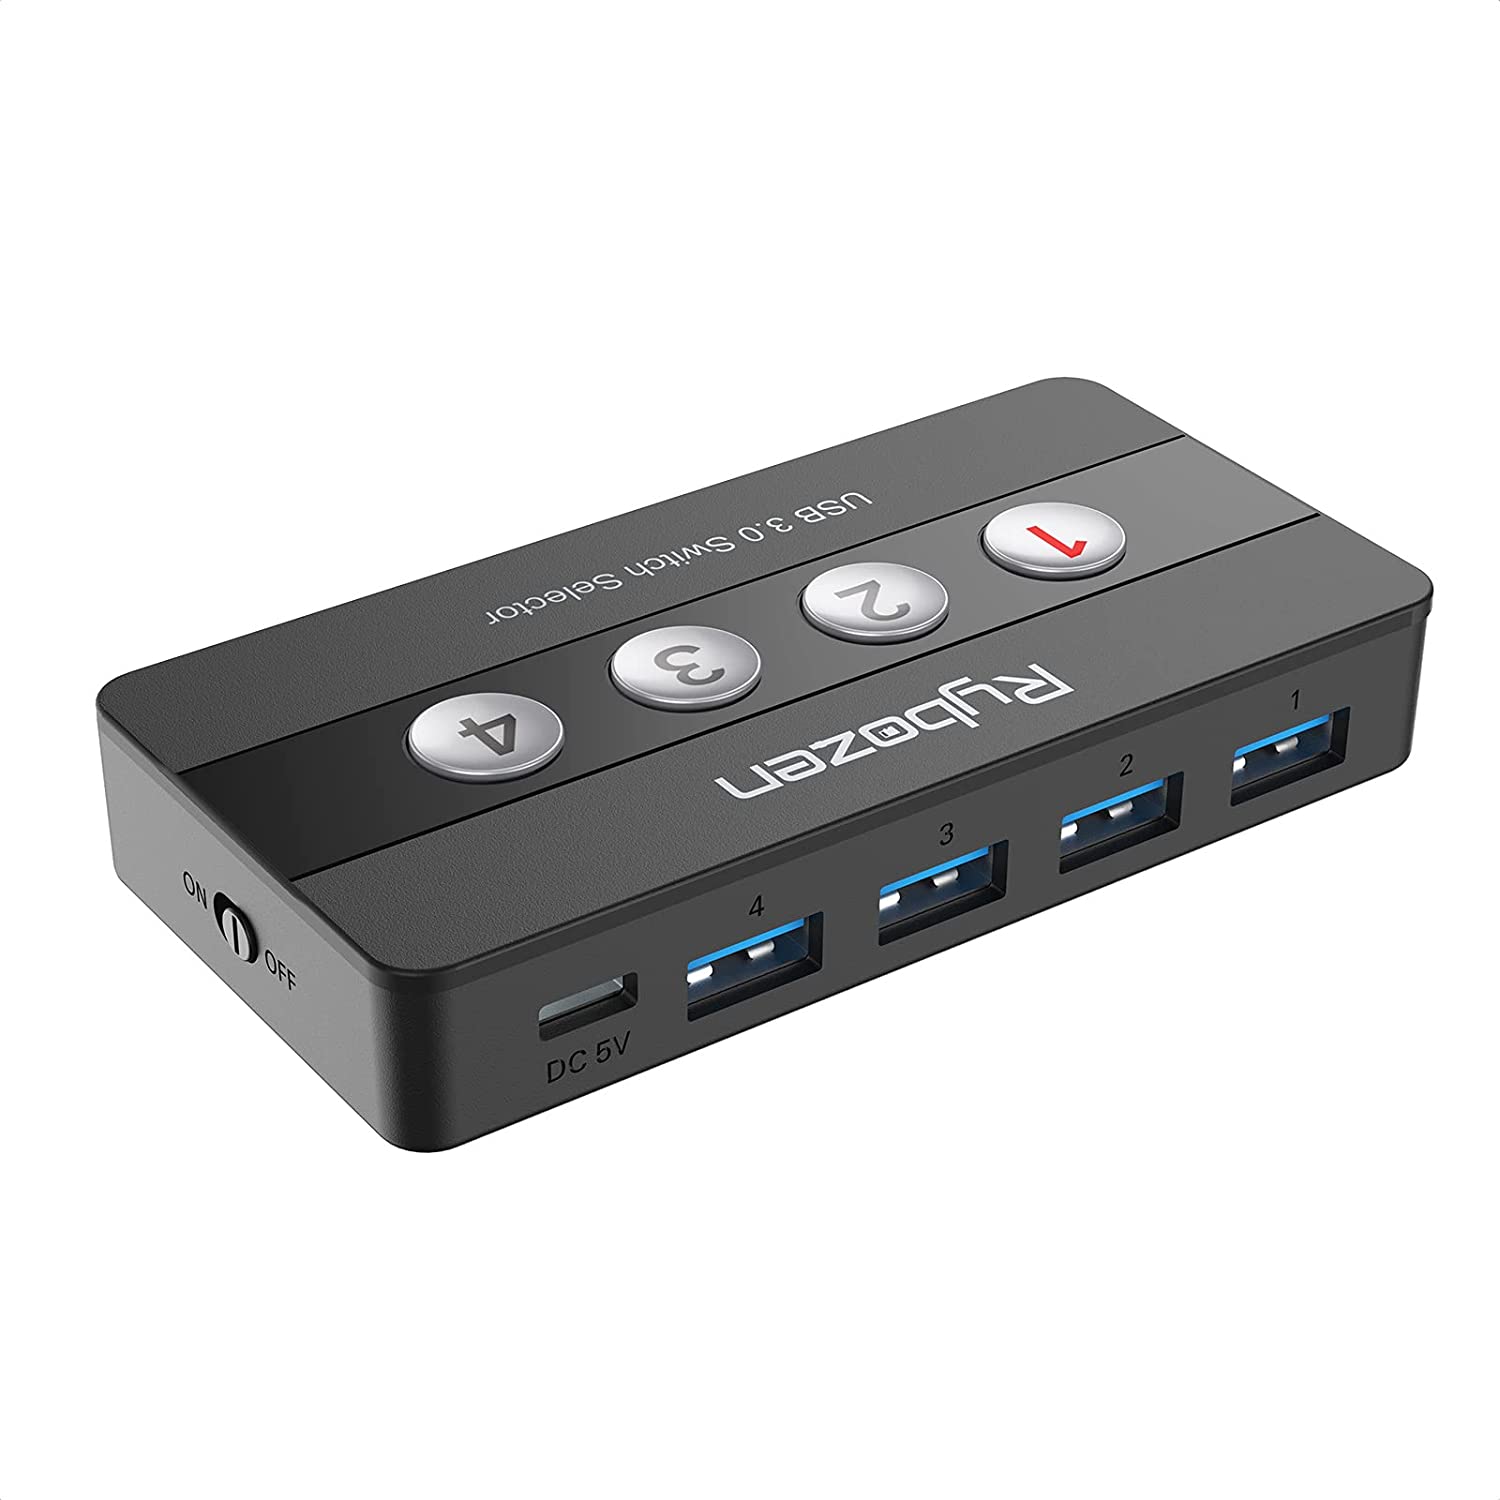  USB 3.0 Switch, USB Switch 4 Computers Sharing 4 USB  Peripherals, USB Switch Selector Support Button or Wireless Remote Control  Switching, Includes 4 USB 3.0 Cables… : Electronics